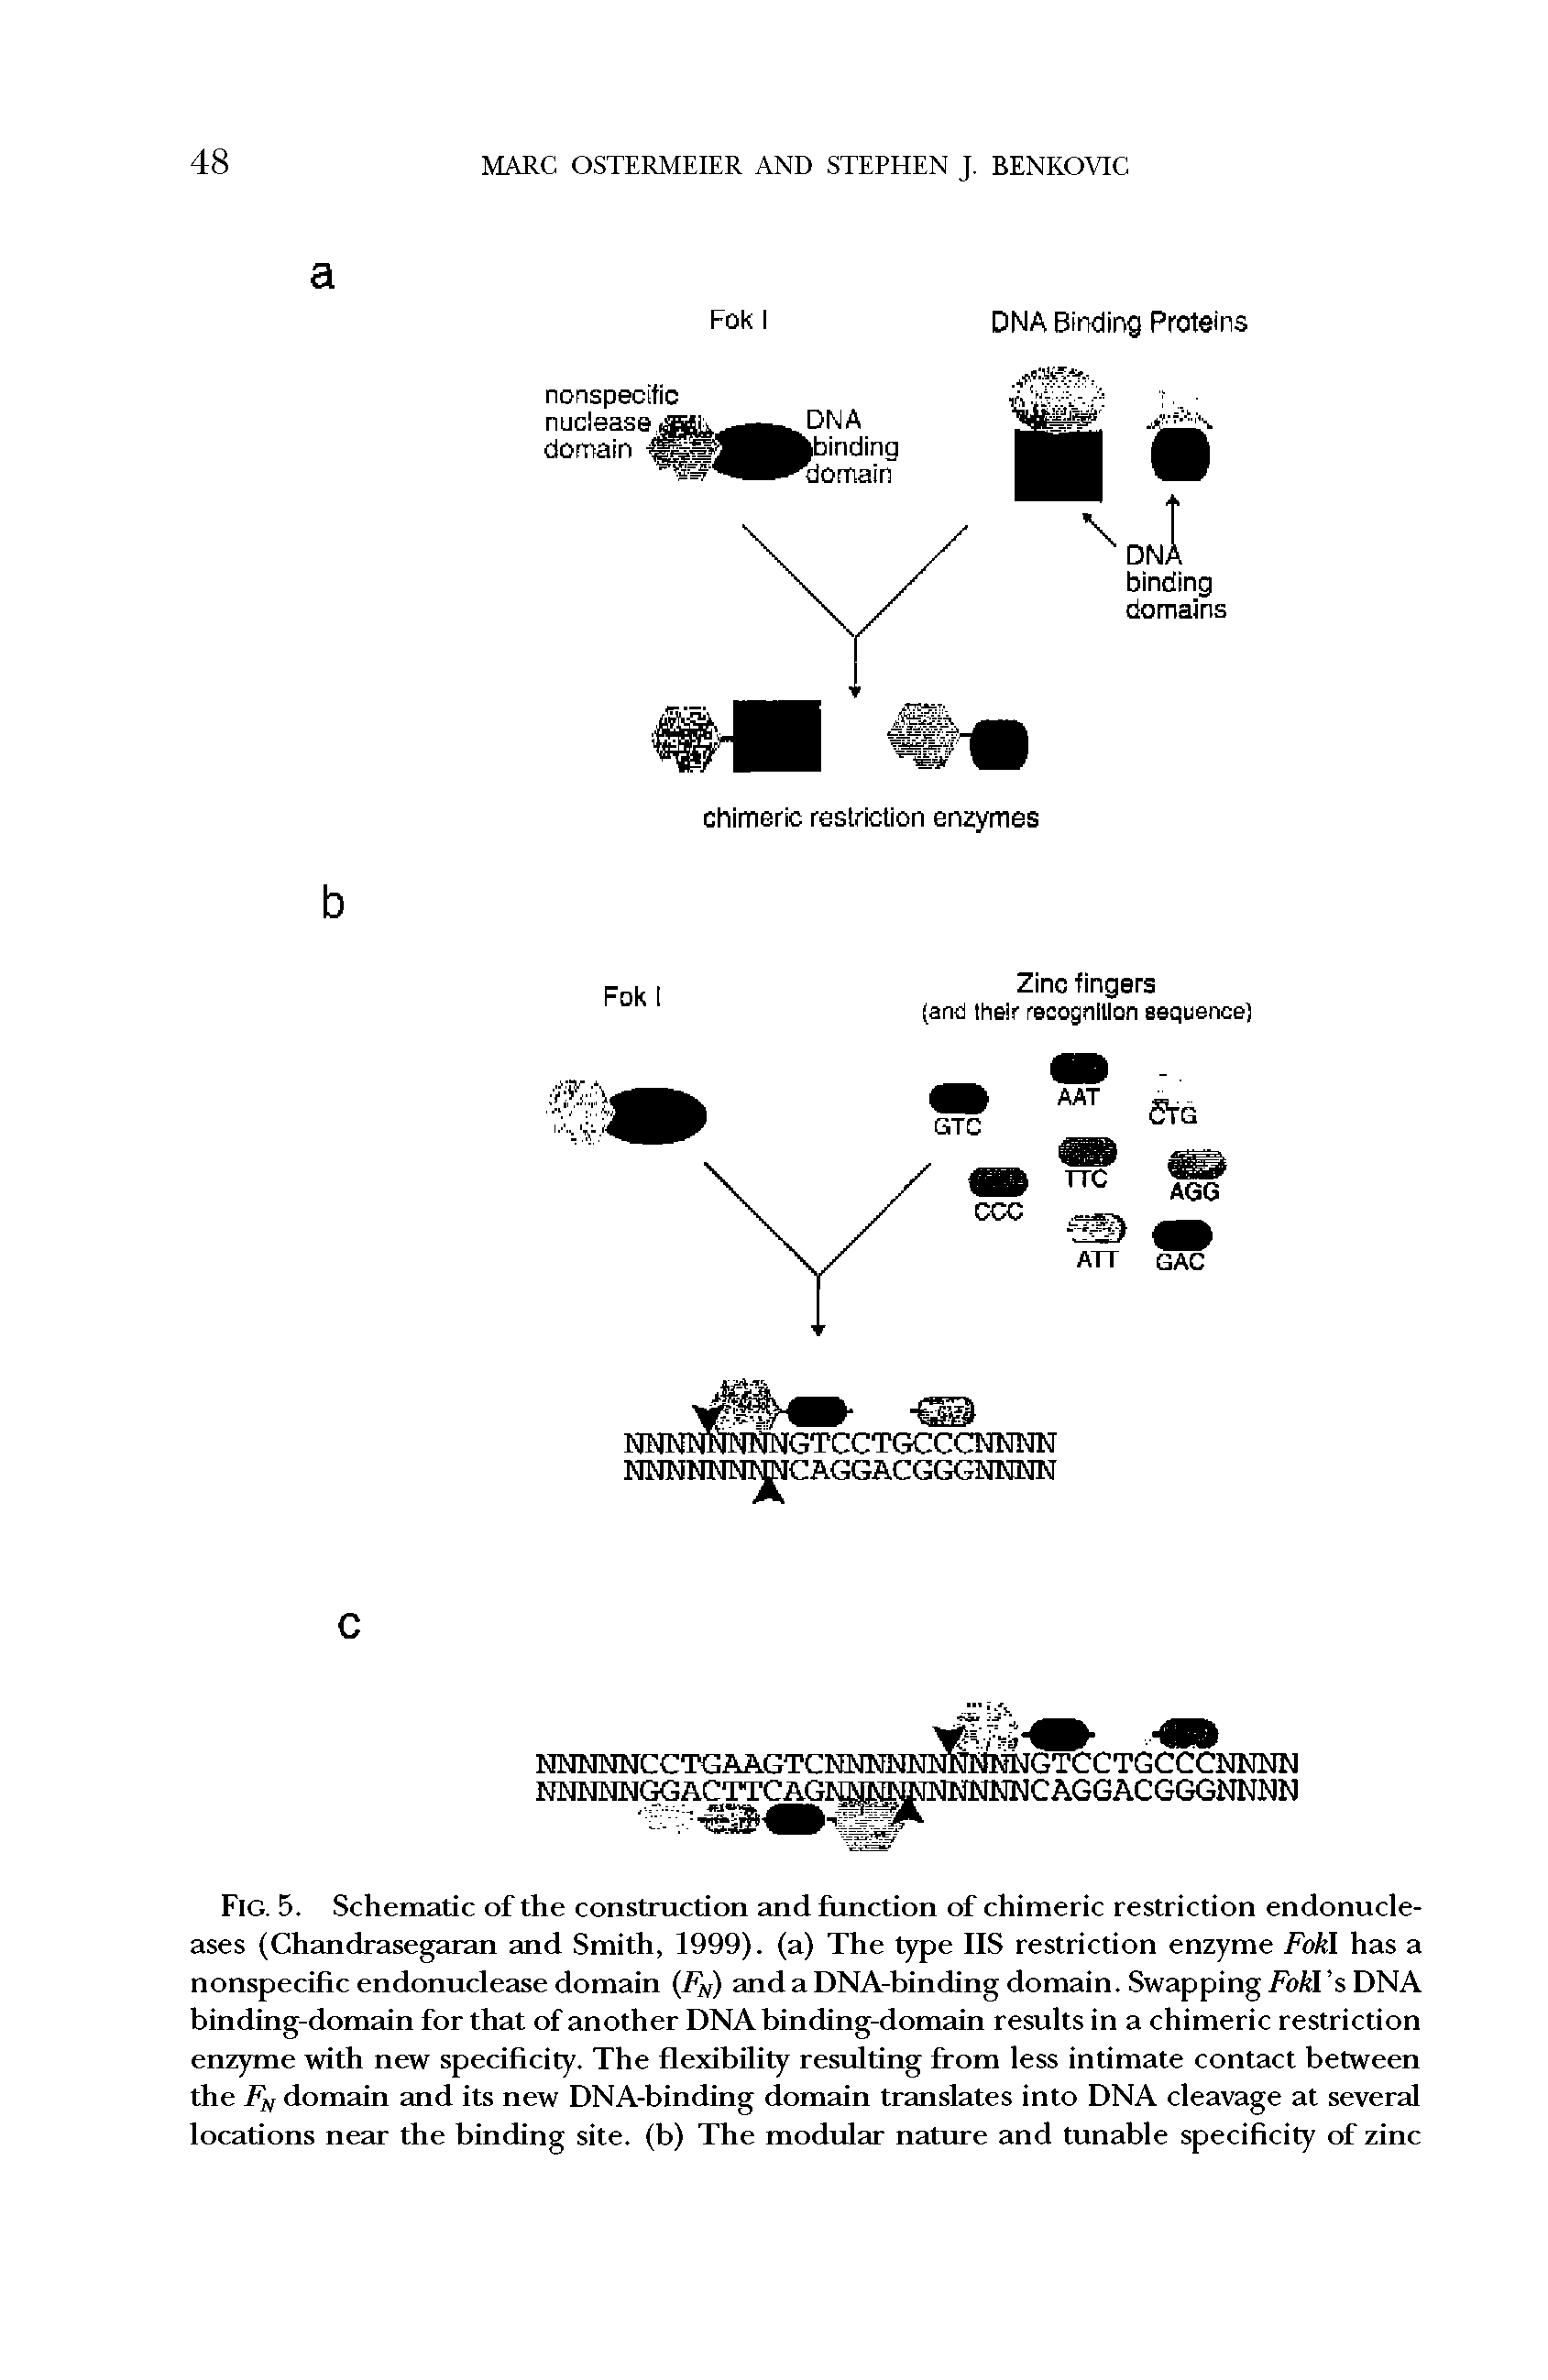 Fig. 5. Schematic of the construction and function of chimeric restriction endonucleases (Chandrasegaran and Smith, 1999). (a) The type IIS restriction enzyme Fokl has a nonspecific endonuclease domain (FN) and a DNA-binding domain. Swapping Fokl s DNA binding-domain for that of another DNA binding-domain results in a chimeric restriction enzyme with new specificity. The flexibility resulting from less intimate contact between the Fn domain and its new DNA-binding domain translates into DNA cleavage at several locations near the binding site, (b) The modular nature and tunable specificity of zinc...